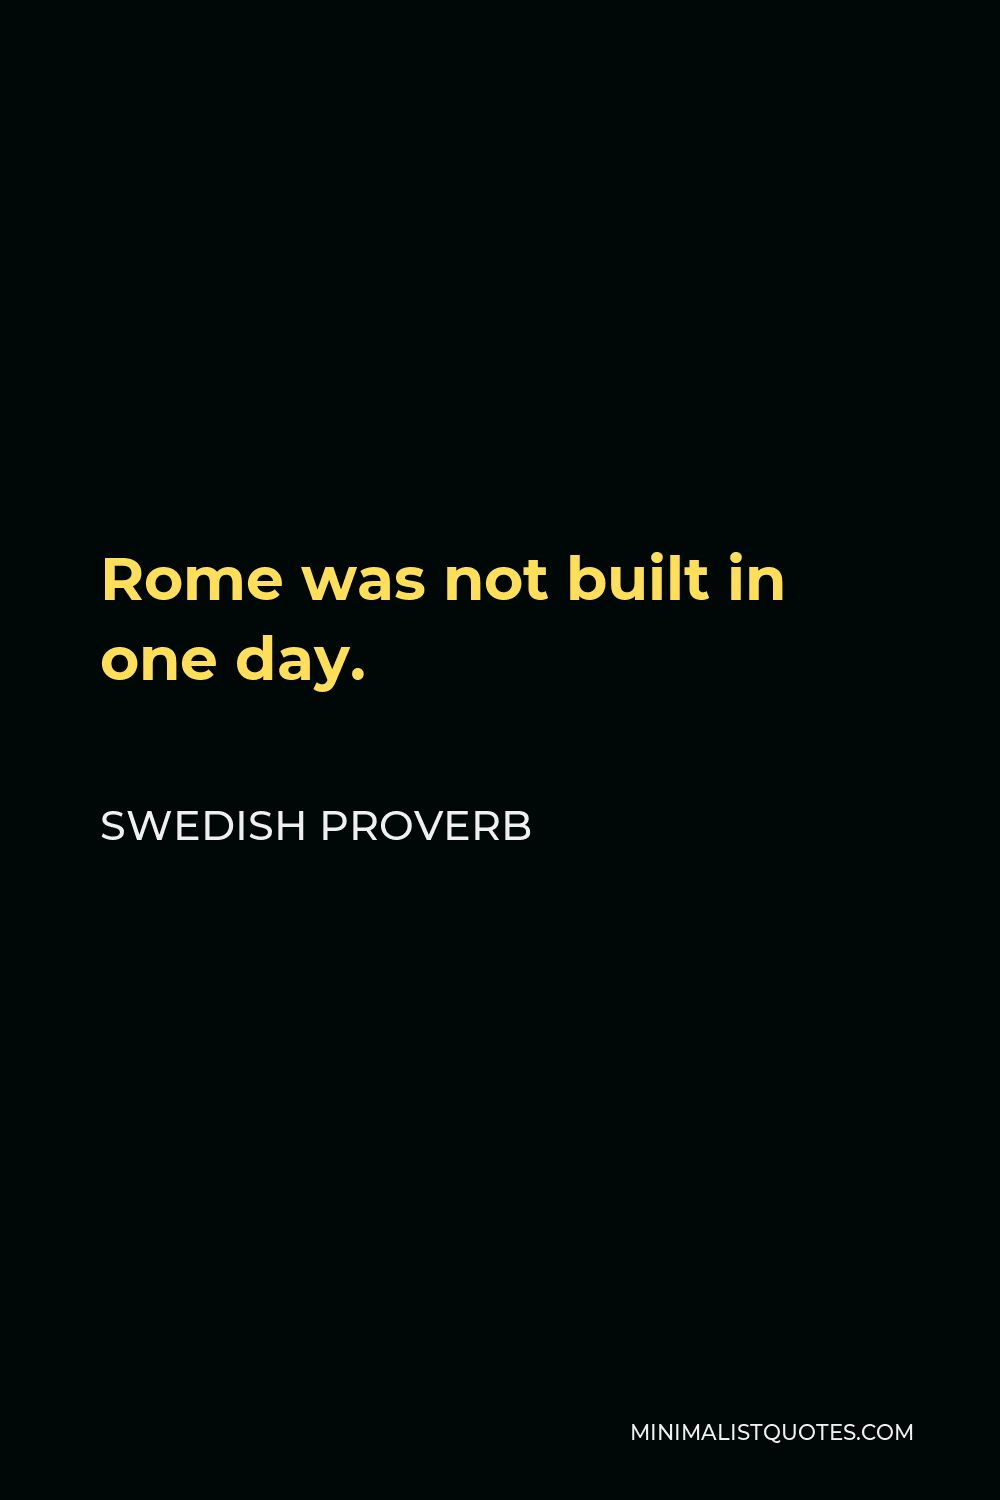 Swedish Proverb Quote - Rome was not built in one day.